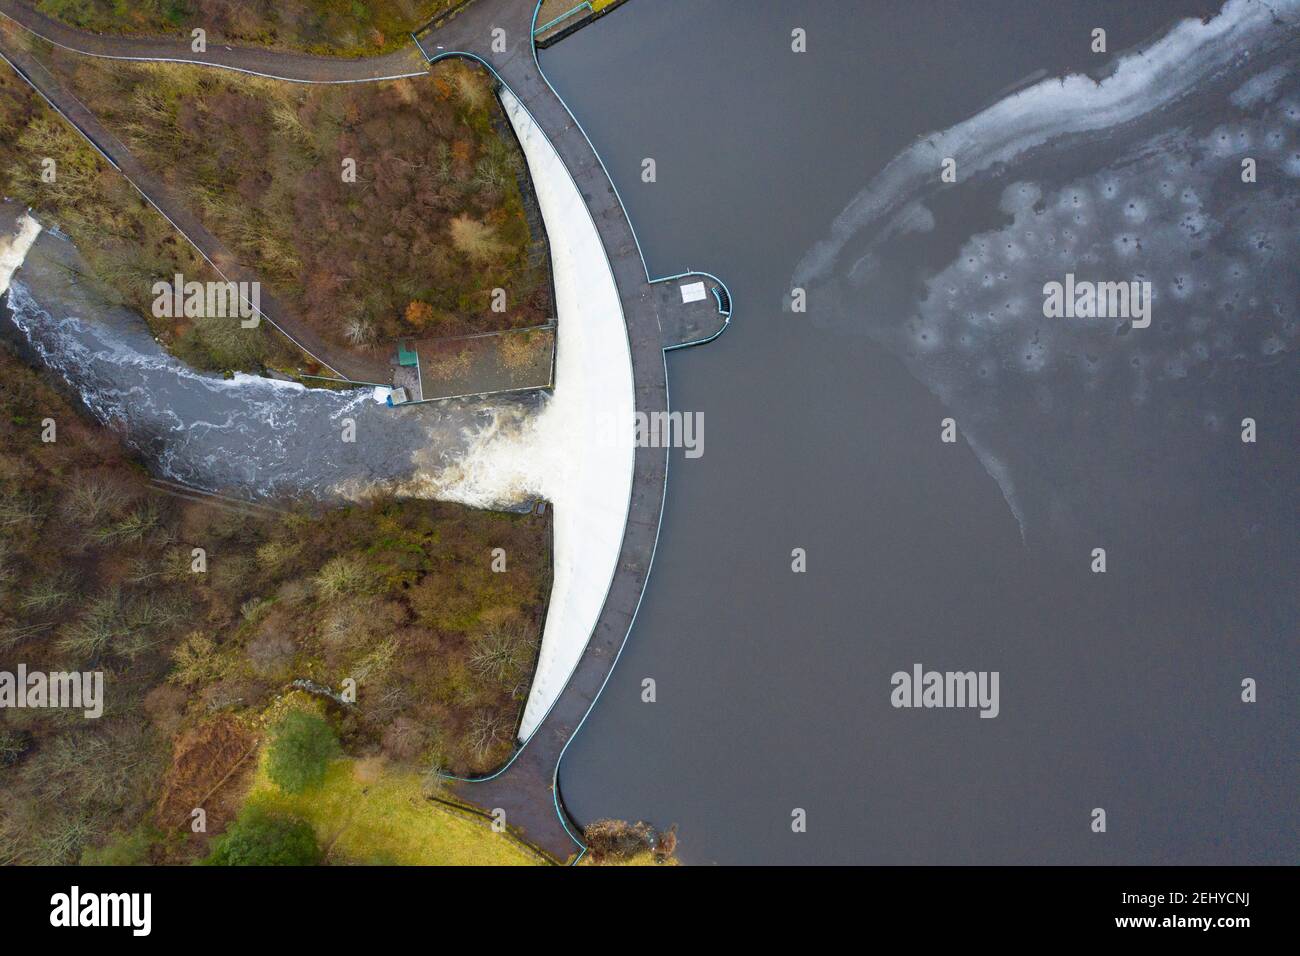 Glen Devon, Perth and Kinross, Scotland, UK. 20 Feb 2021. Meltwater from recent snow and heavy rain has filled Scottish reservoirs to capacity. Dam spillways are now full whilst discharging water downstream. Pic; Drone image of spillway at Castlehill Dam running at full capacity to discharge water from the reservoir. Iain Masterton/Alamy Live News Stock Photo